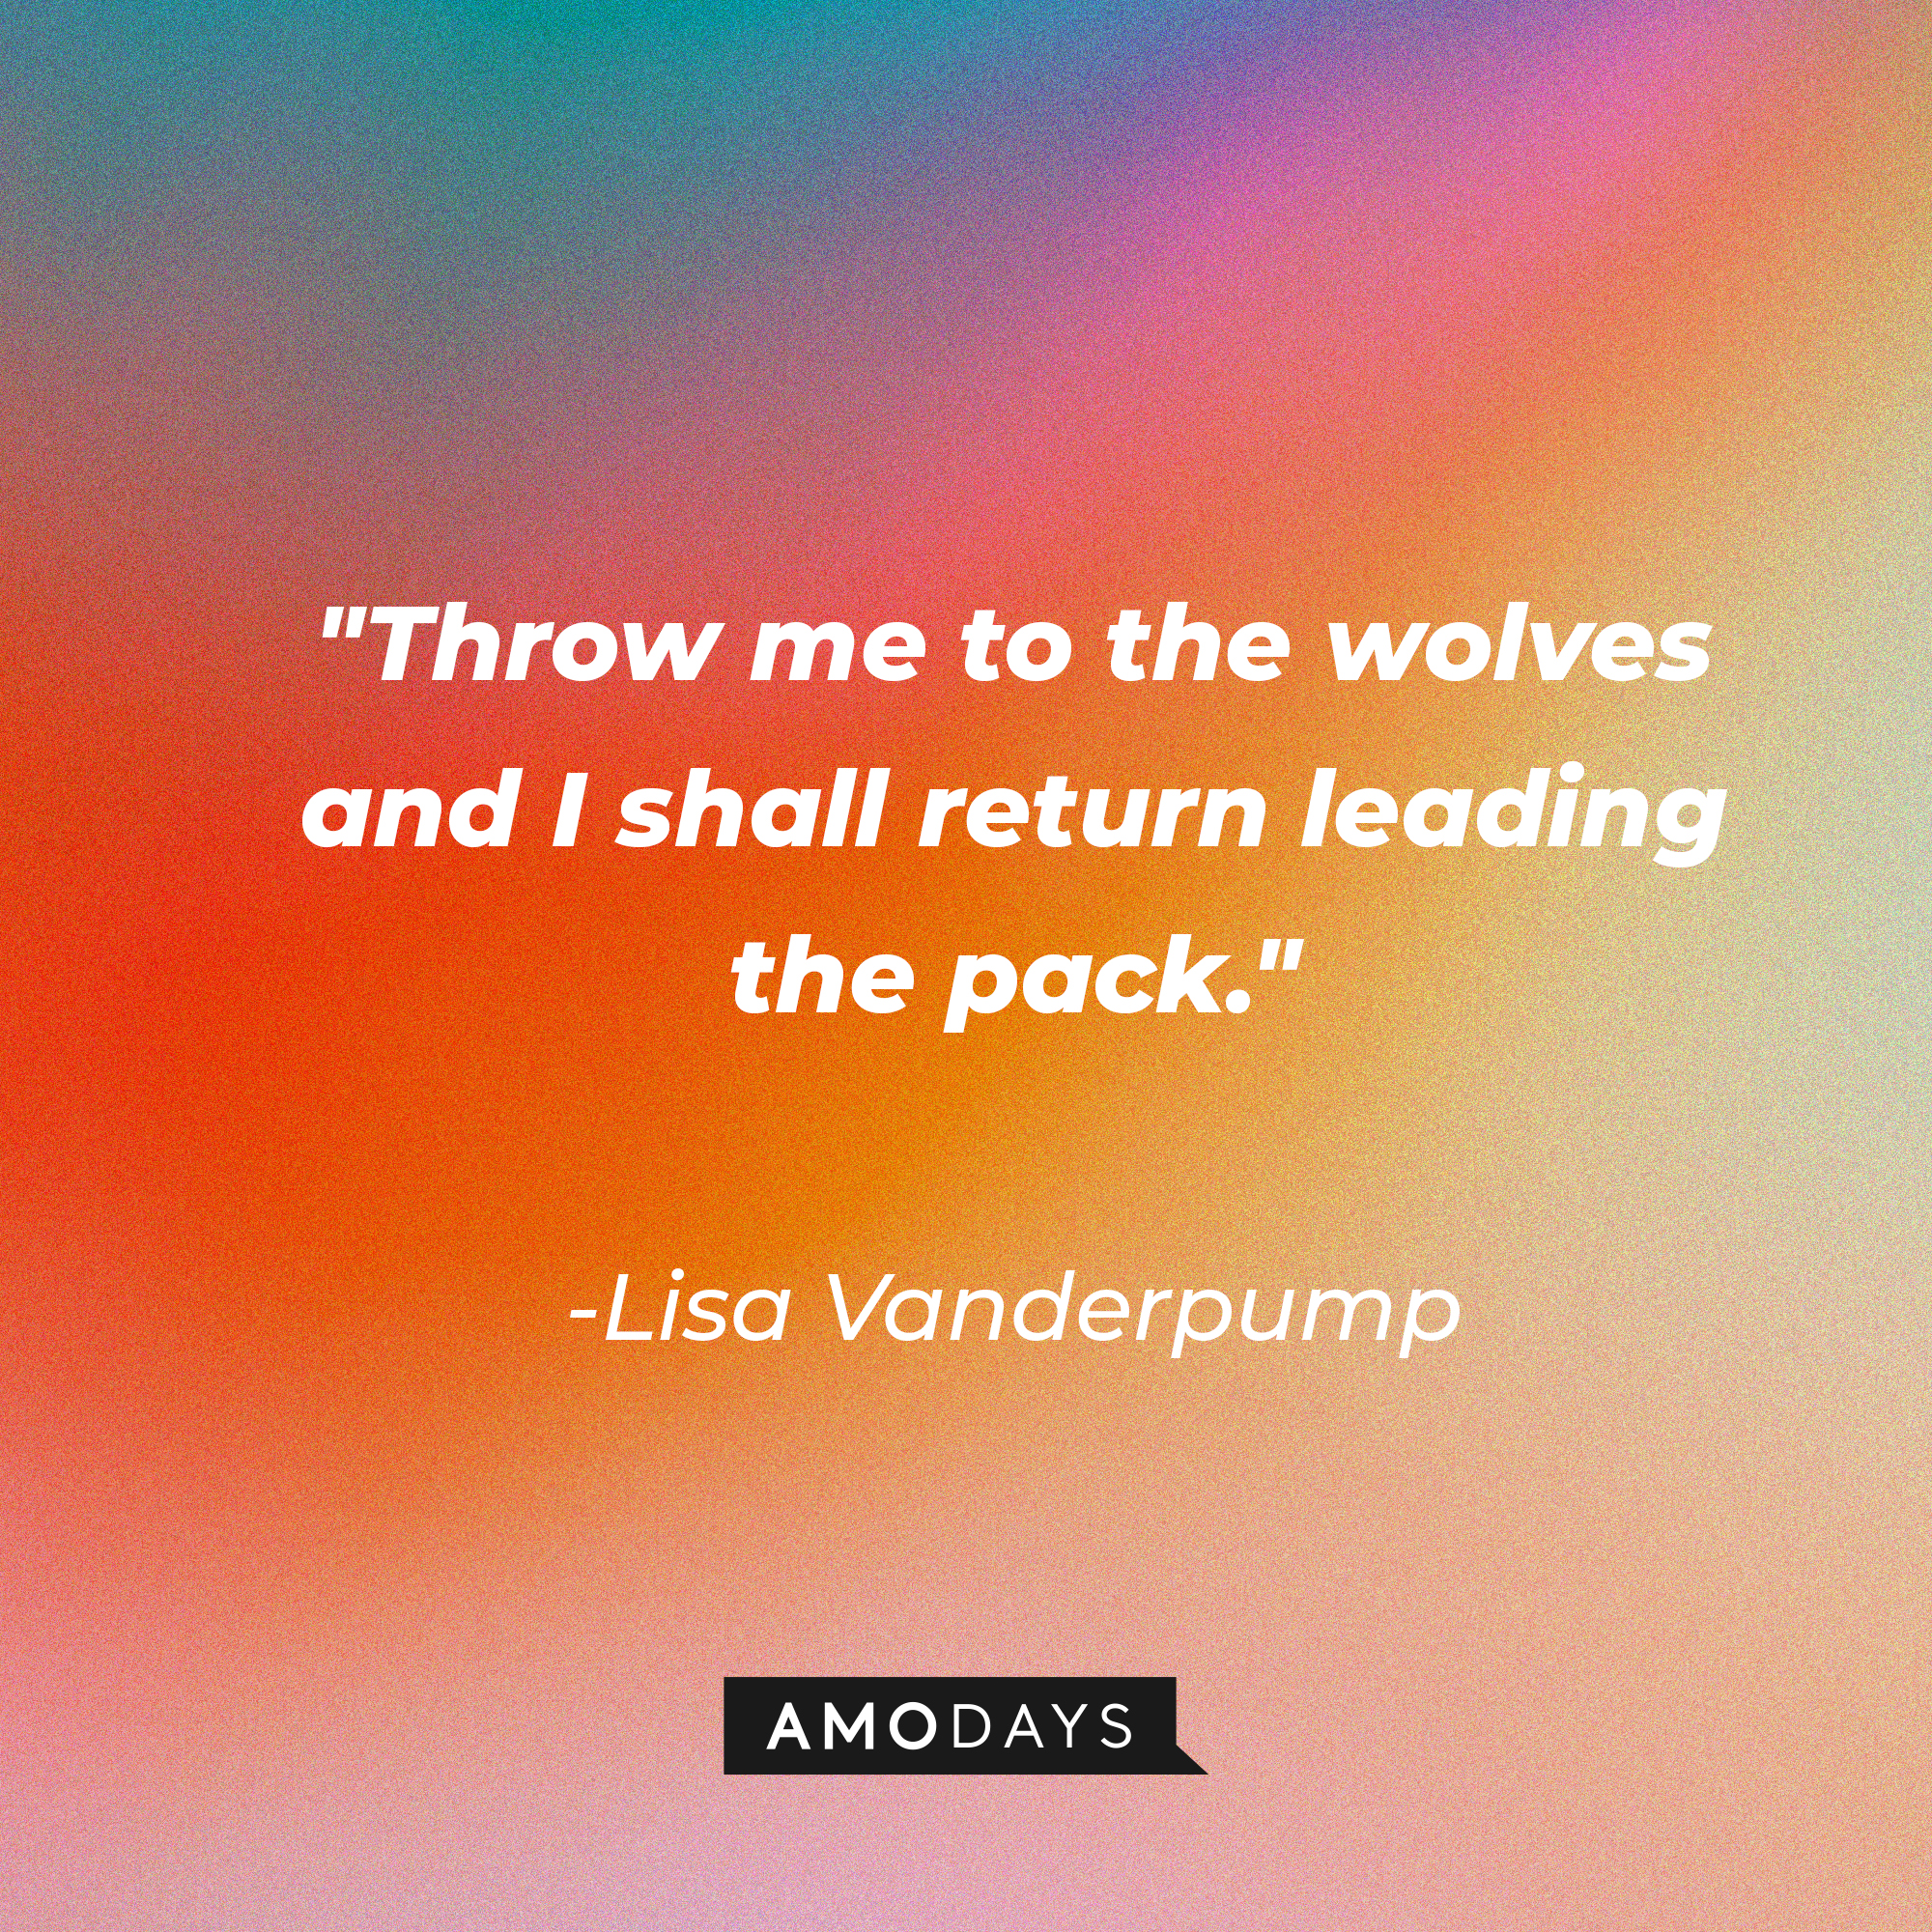 Lisa Vanderpump’s quote: “Throw me to the wolves, and I shall return leading the pack.” | Source: AmoDays